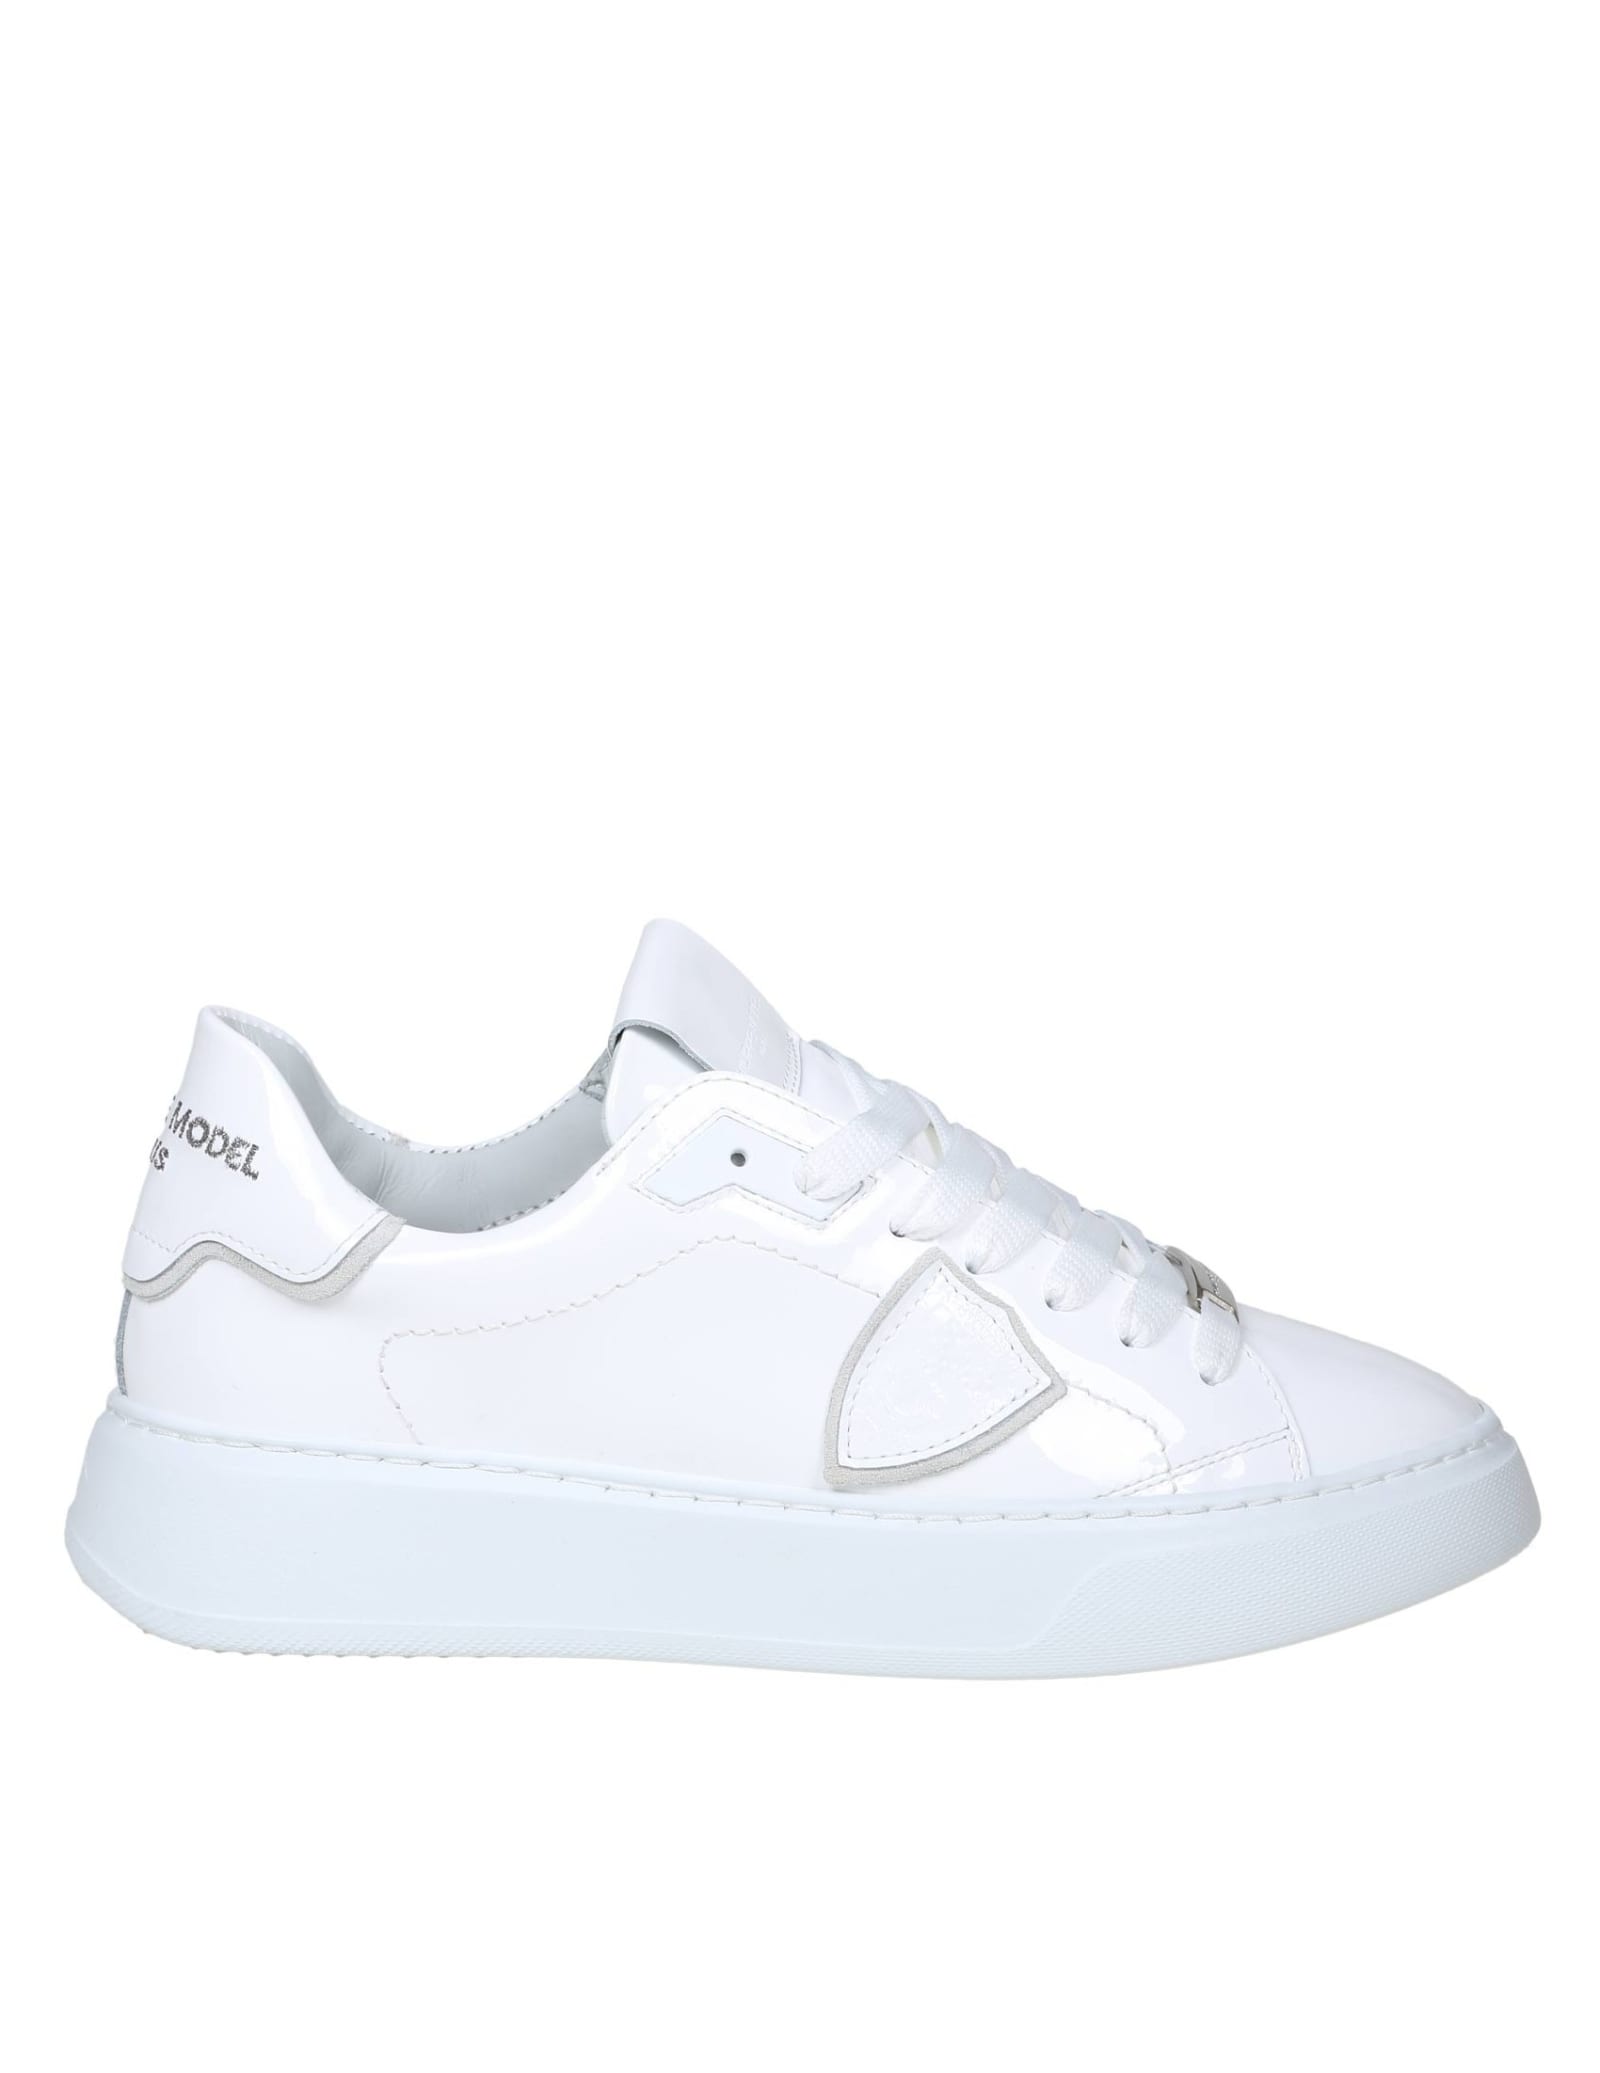 Philippe Model Temple In White Patent Leather